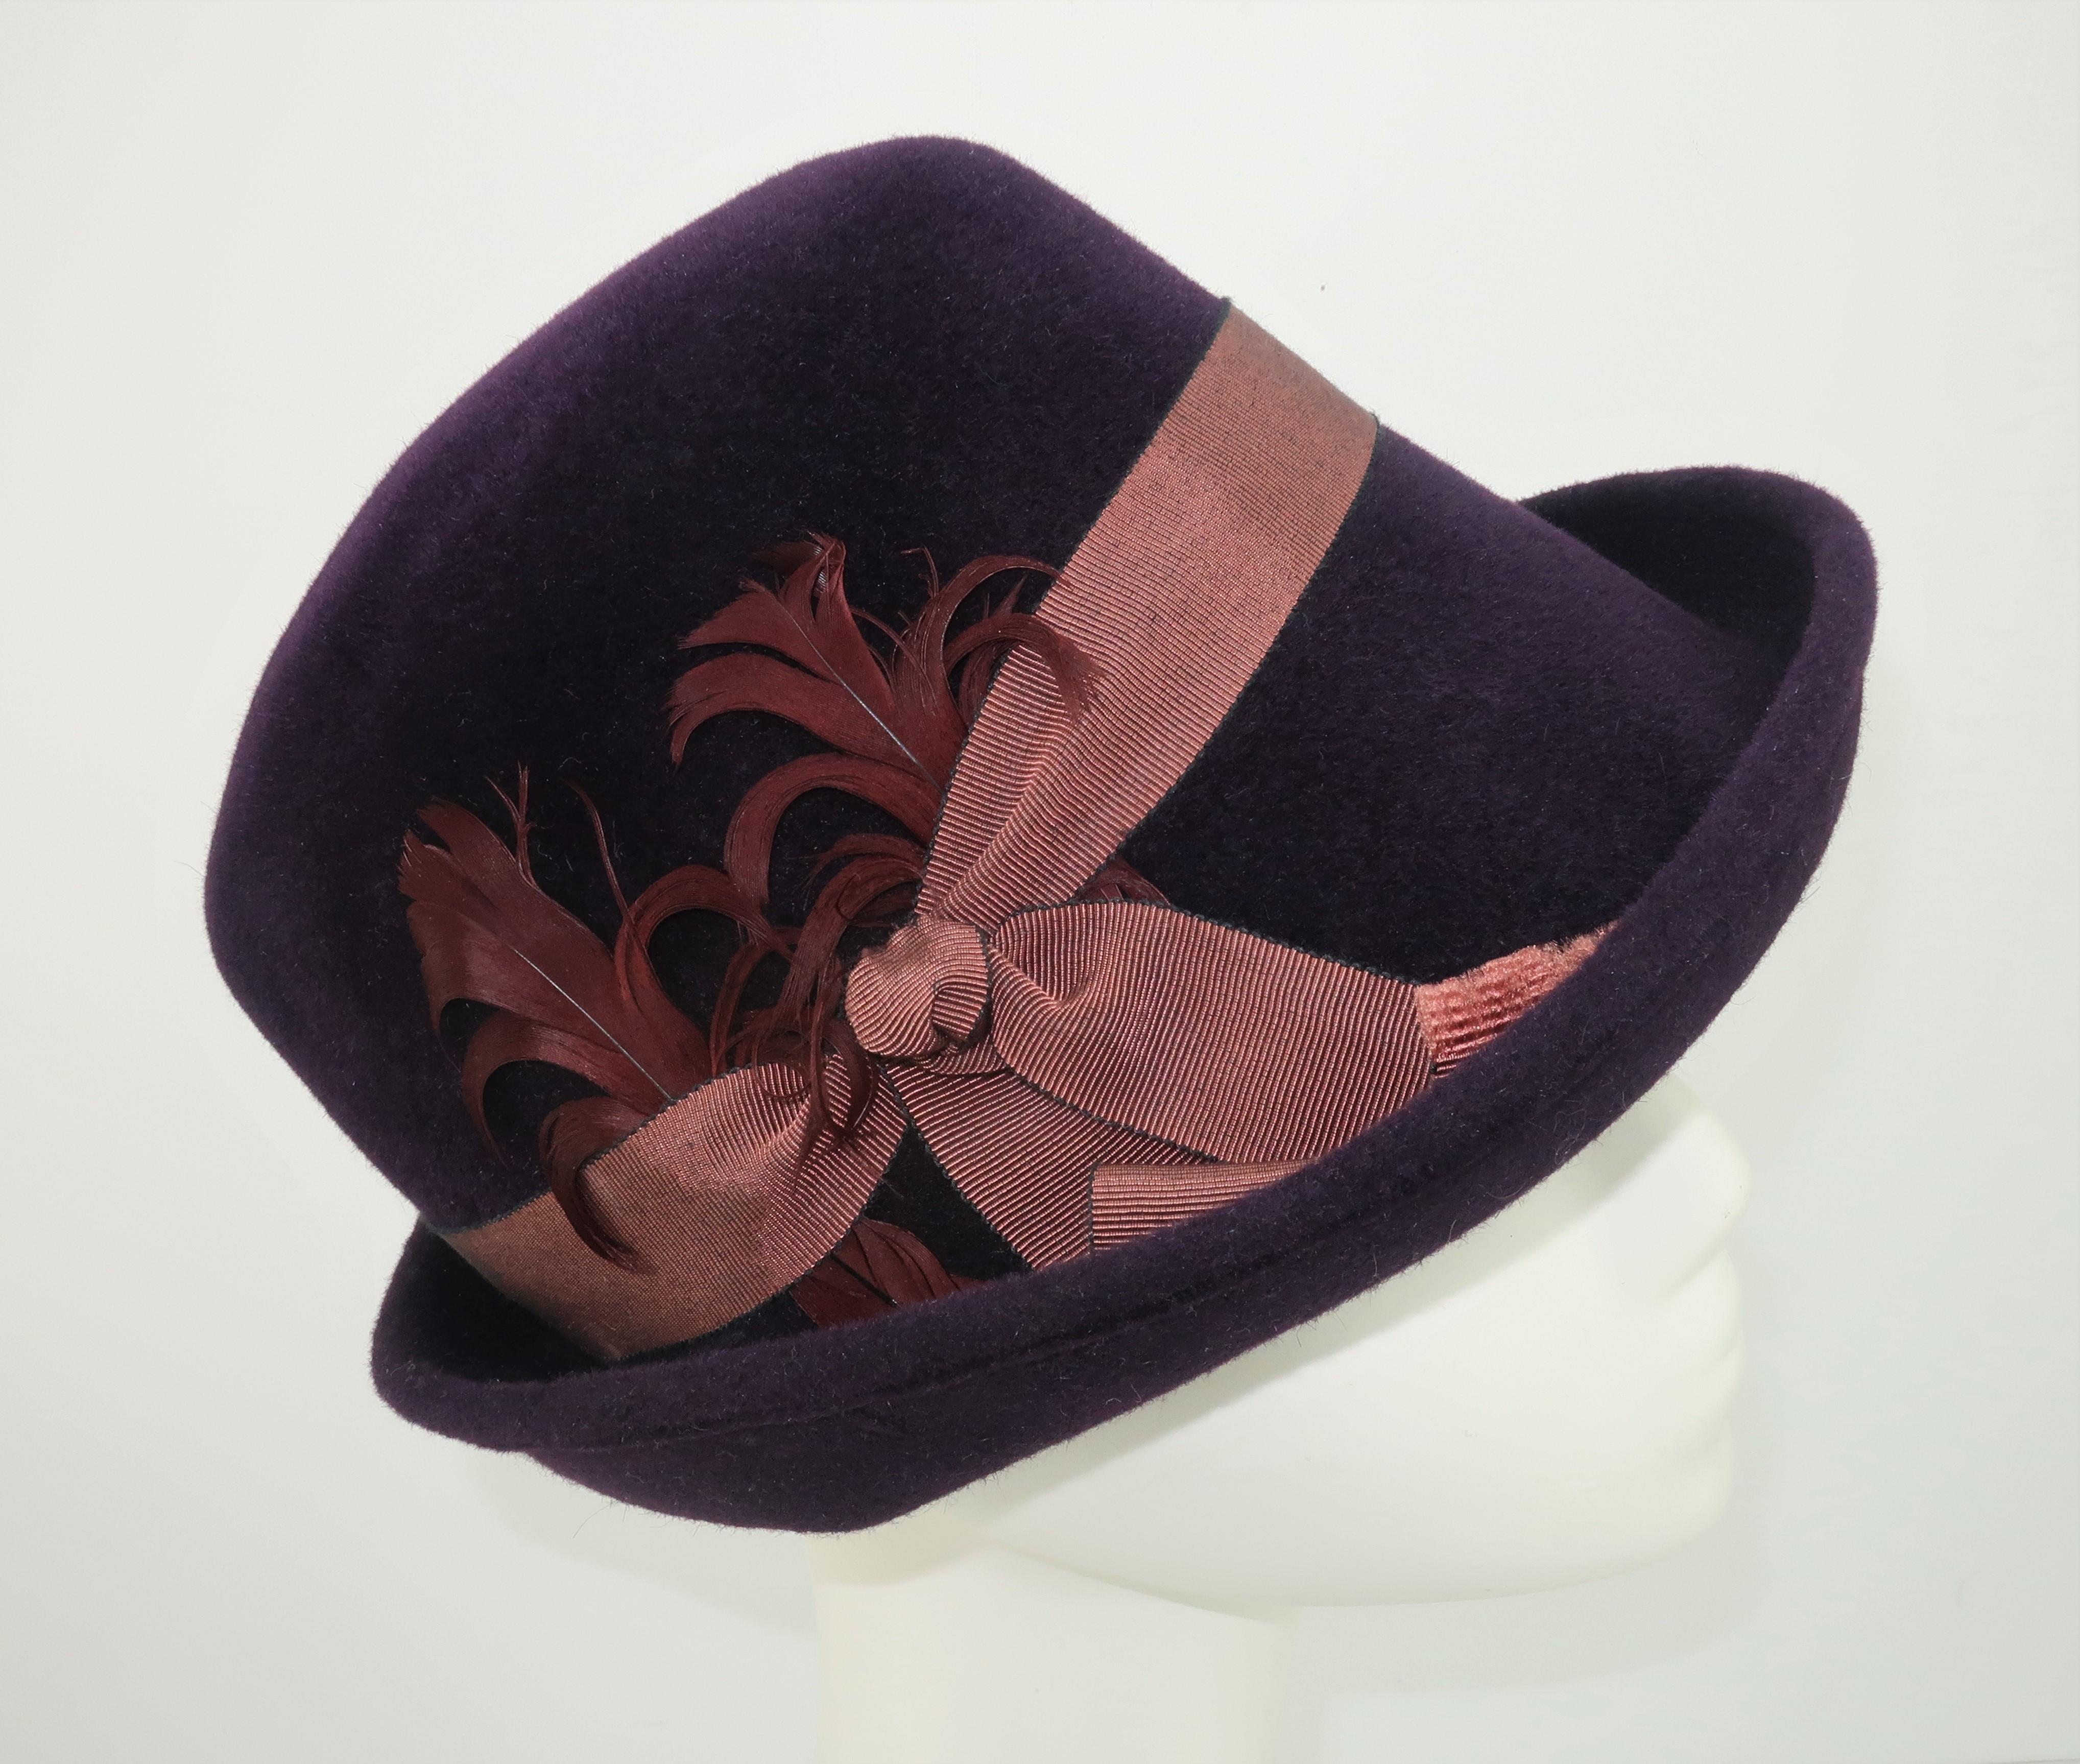 Modern meets old school with this updated wool trilby hat by New York milliner, Lola Ehrlich.  The deep aubergine or plum color is perfectly accented by a grosgrain ribbon and a fan of feathers.
CONDITION
The hat is in good previously owned